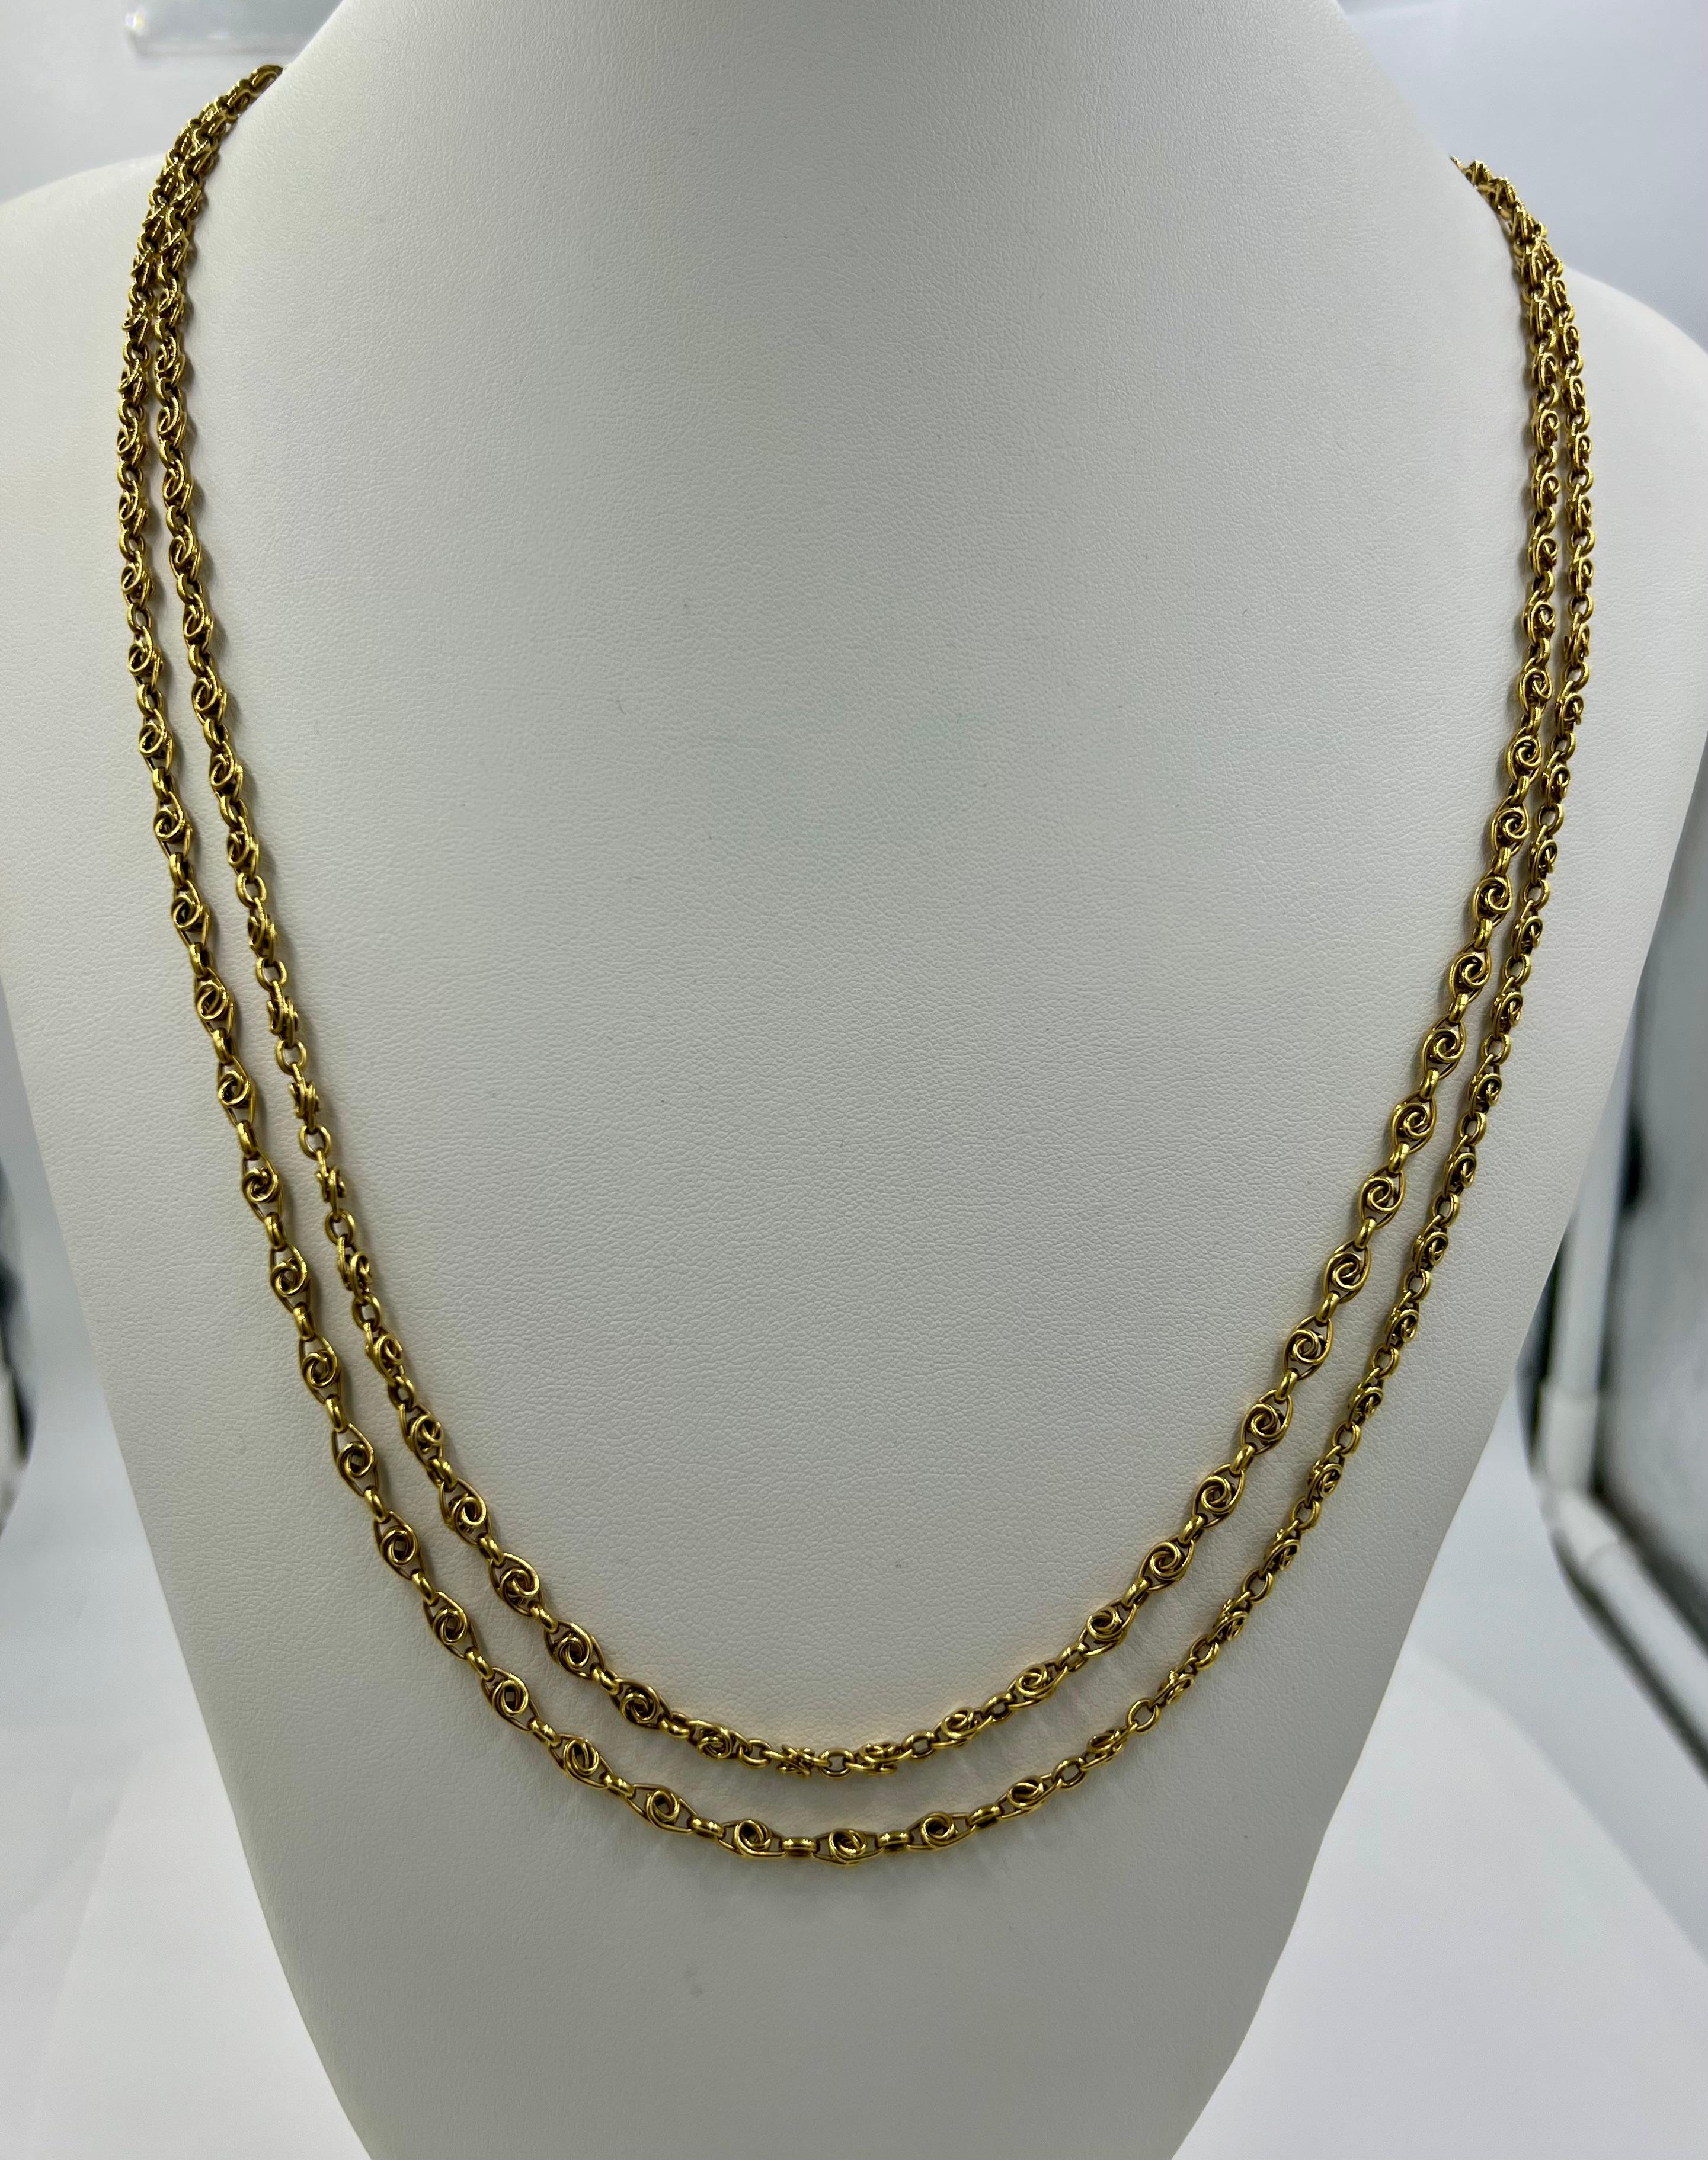 French Victorian yellow gold long chain, circa 1890s

  This all hand made chain was used as a lorgnette chain necklace back then.  Today it can be worn many ways long or short.  Pictures below show two different ways to wear this